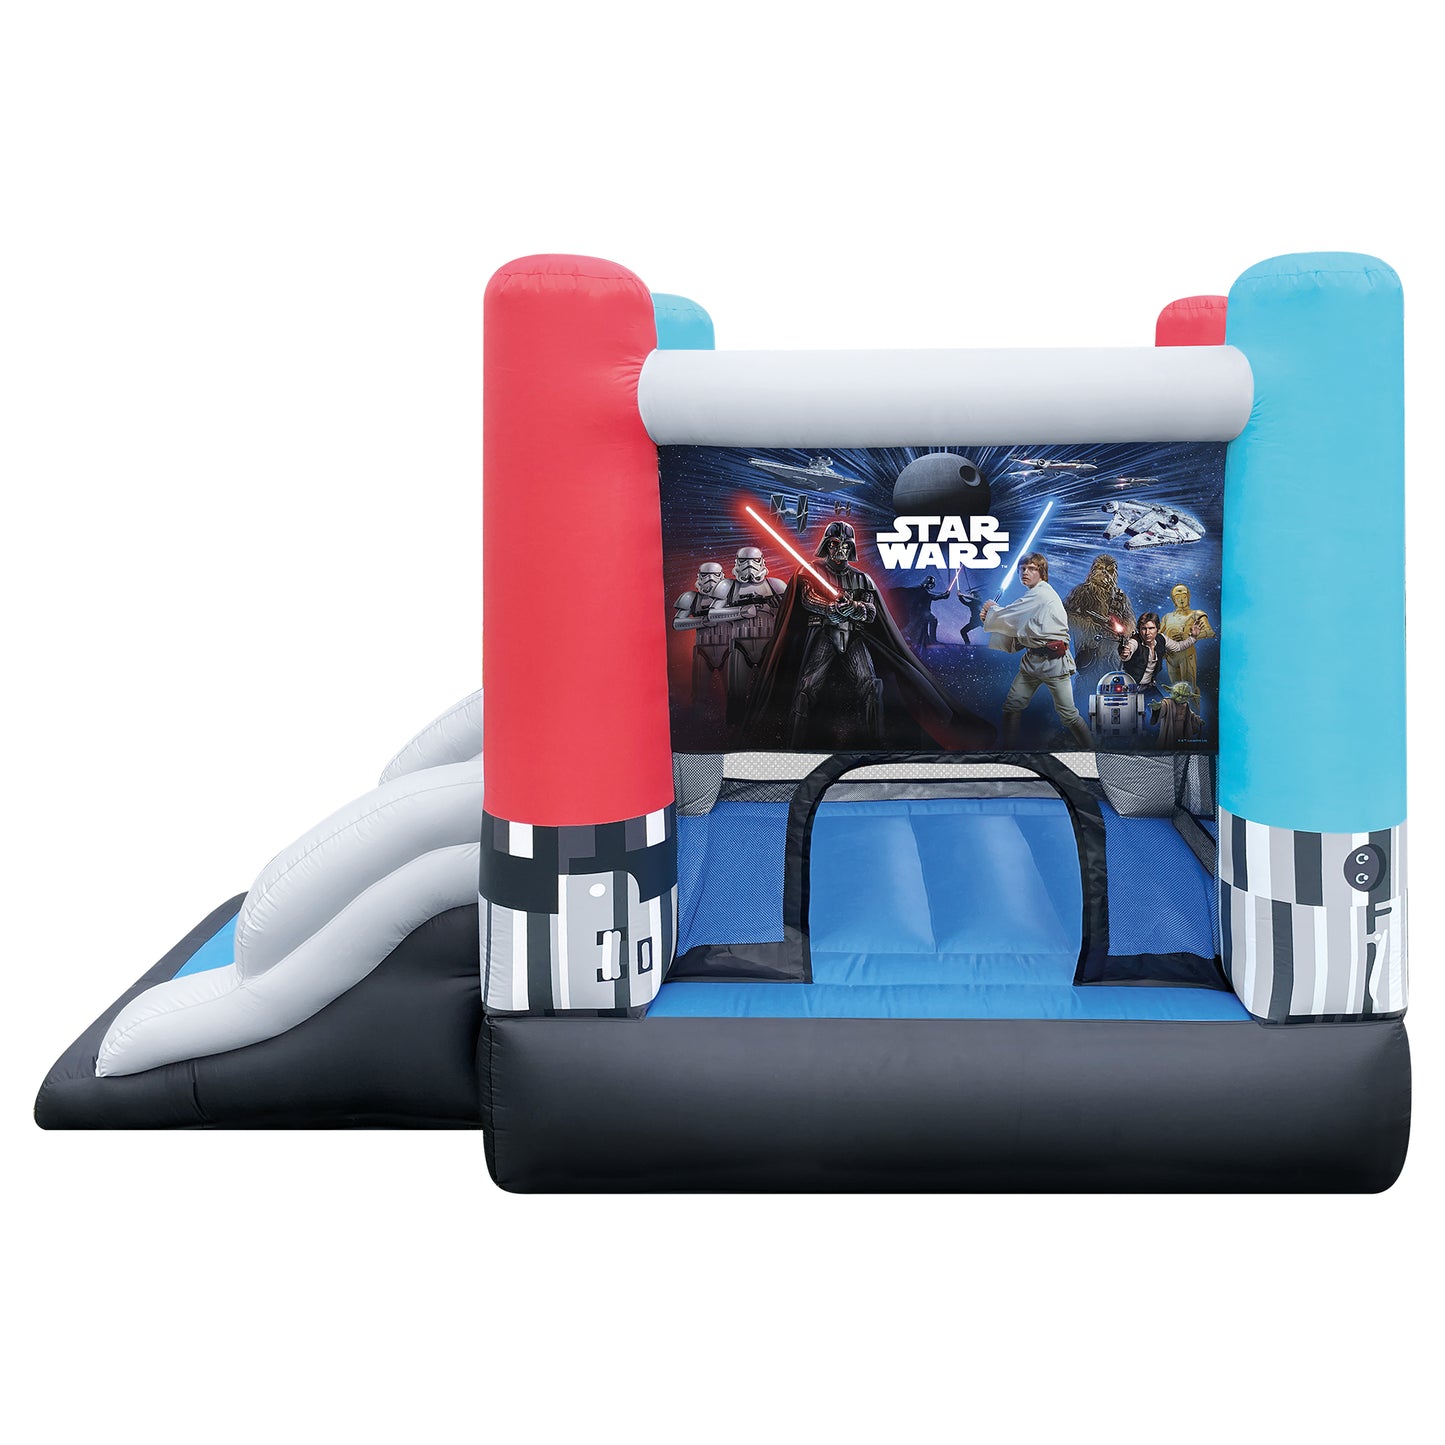 Star Wars Bounce and Slide - Funormous